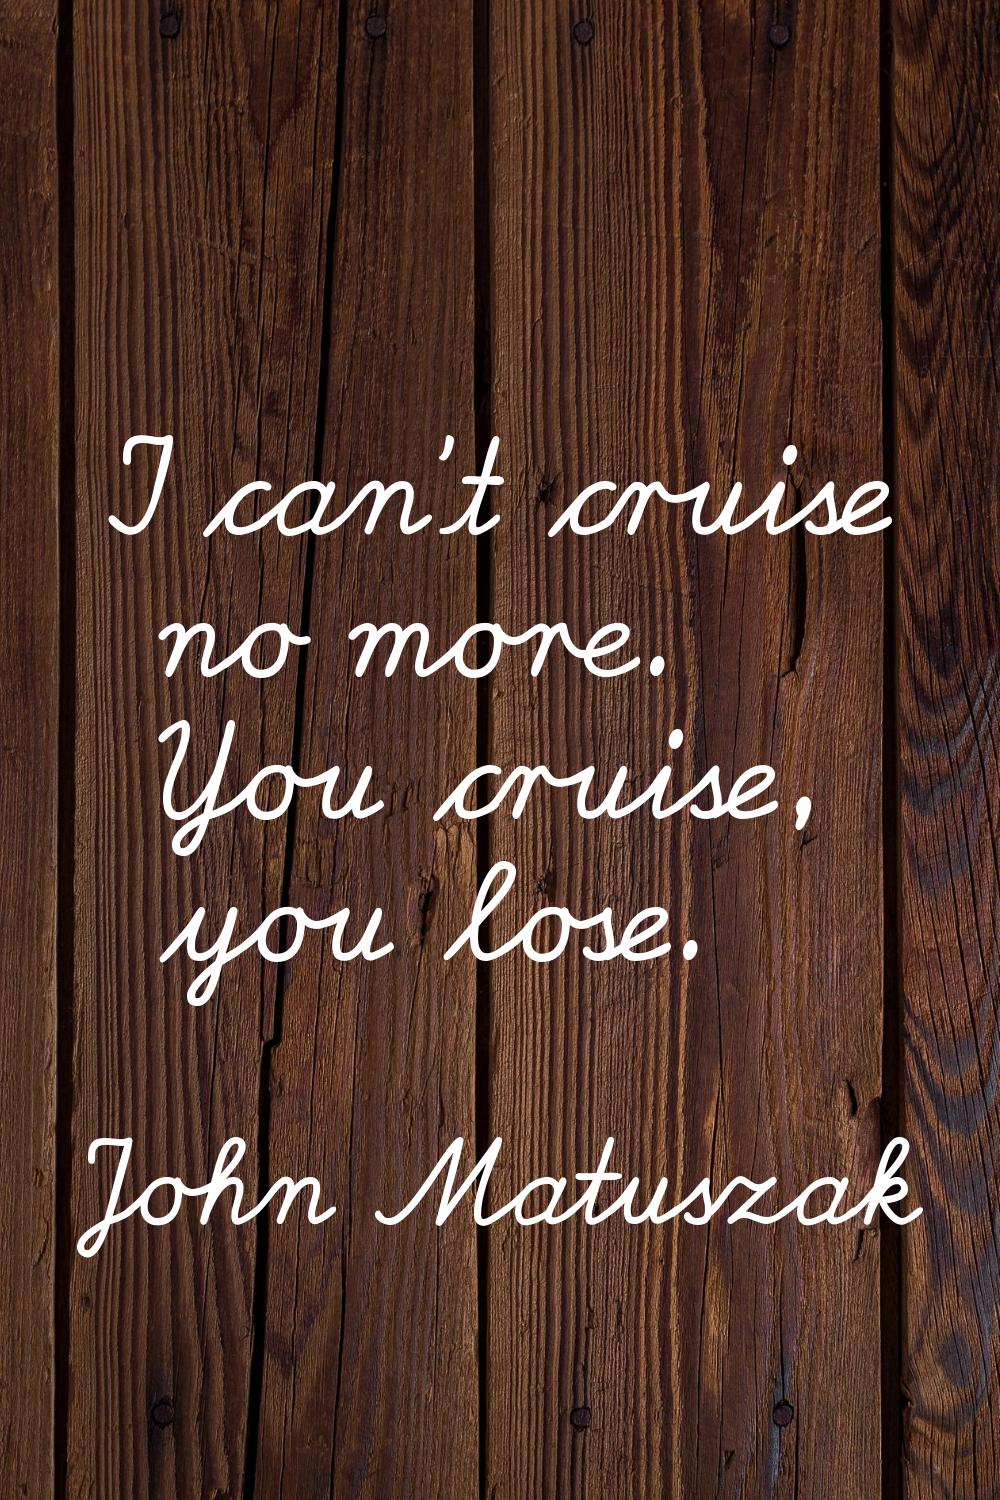 I can't cruise no more. You cruise, you lose.